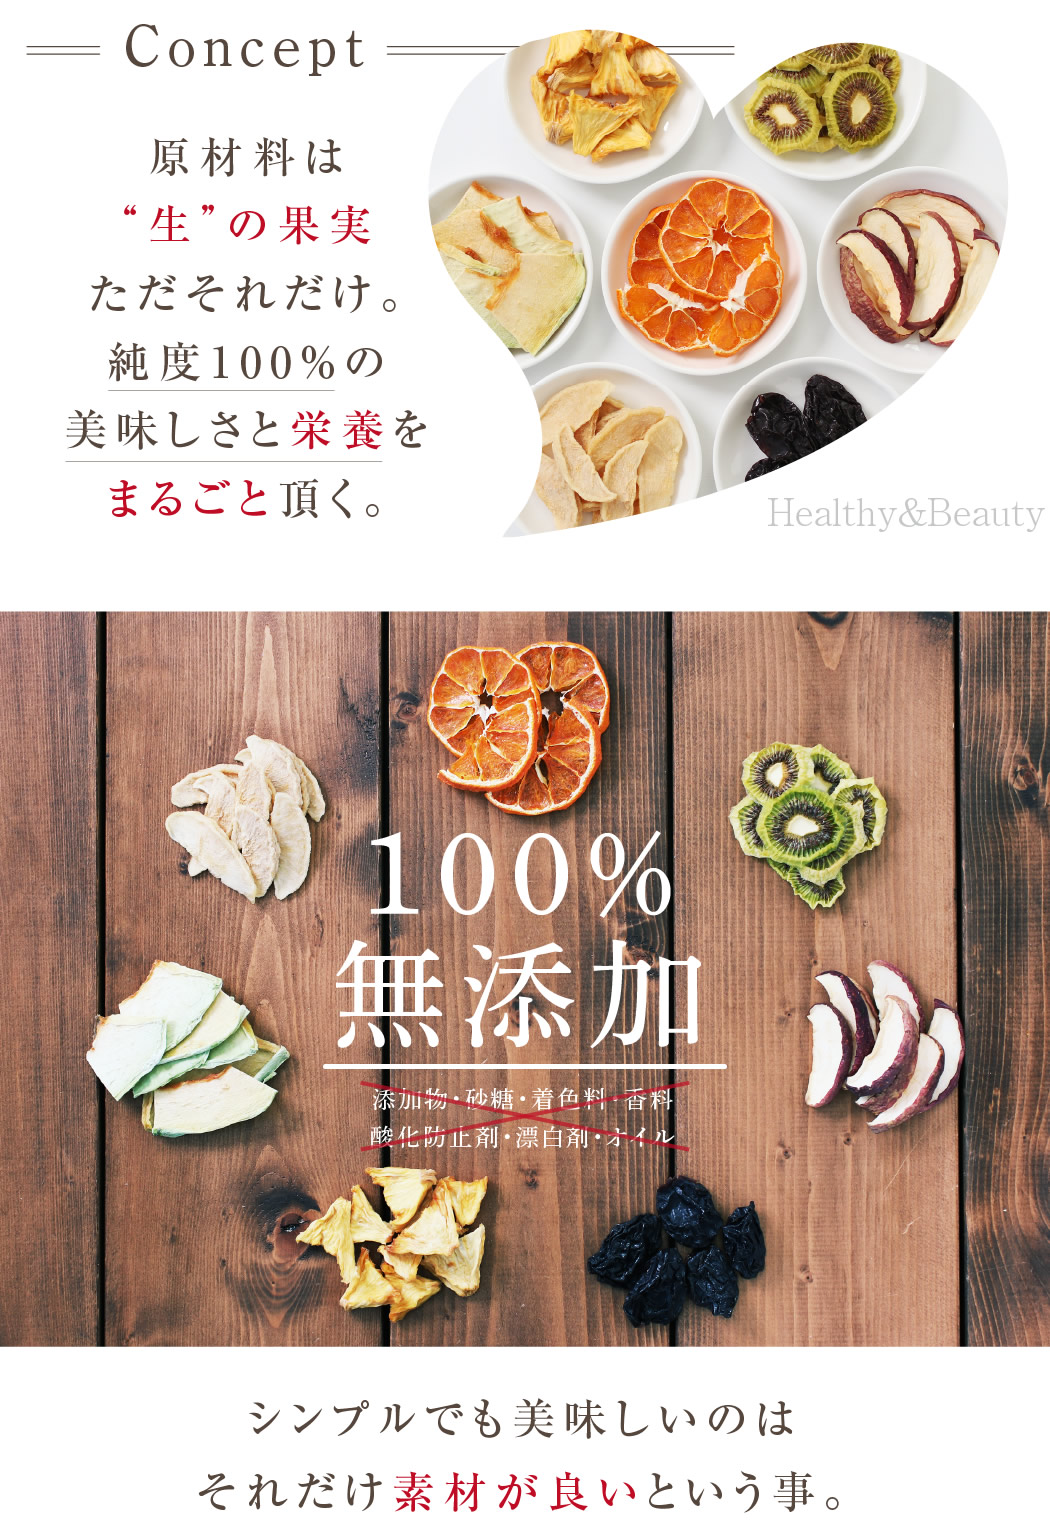 dried fruits, dried fruits gift set, japanese dried fruits, japanese dried fruits gift set, japanese dried melon chips, dried melon chips, best luxury japanese desserts, luxury Japanese desserts, best Japanese snacks, hard to find japanese dessert, hard to find japanese snacks, hard to find japanese snacks online, axaliving, axaliving toronto, axaliving canada, dessert you can only find in Japan